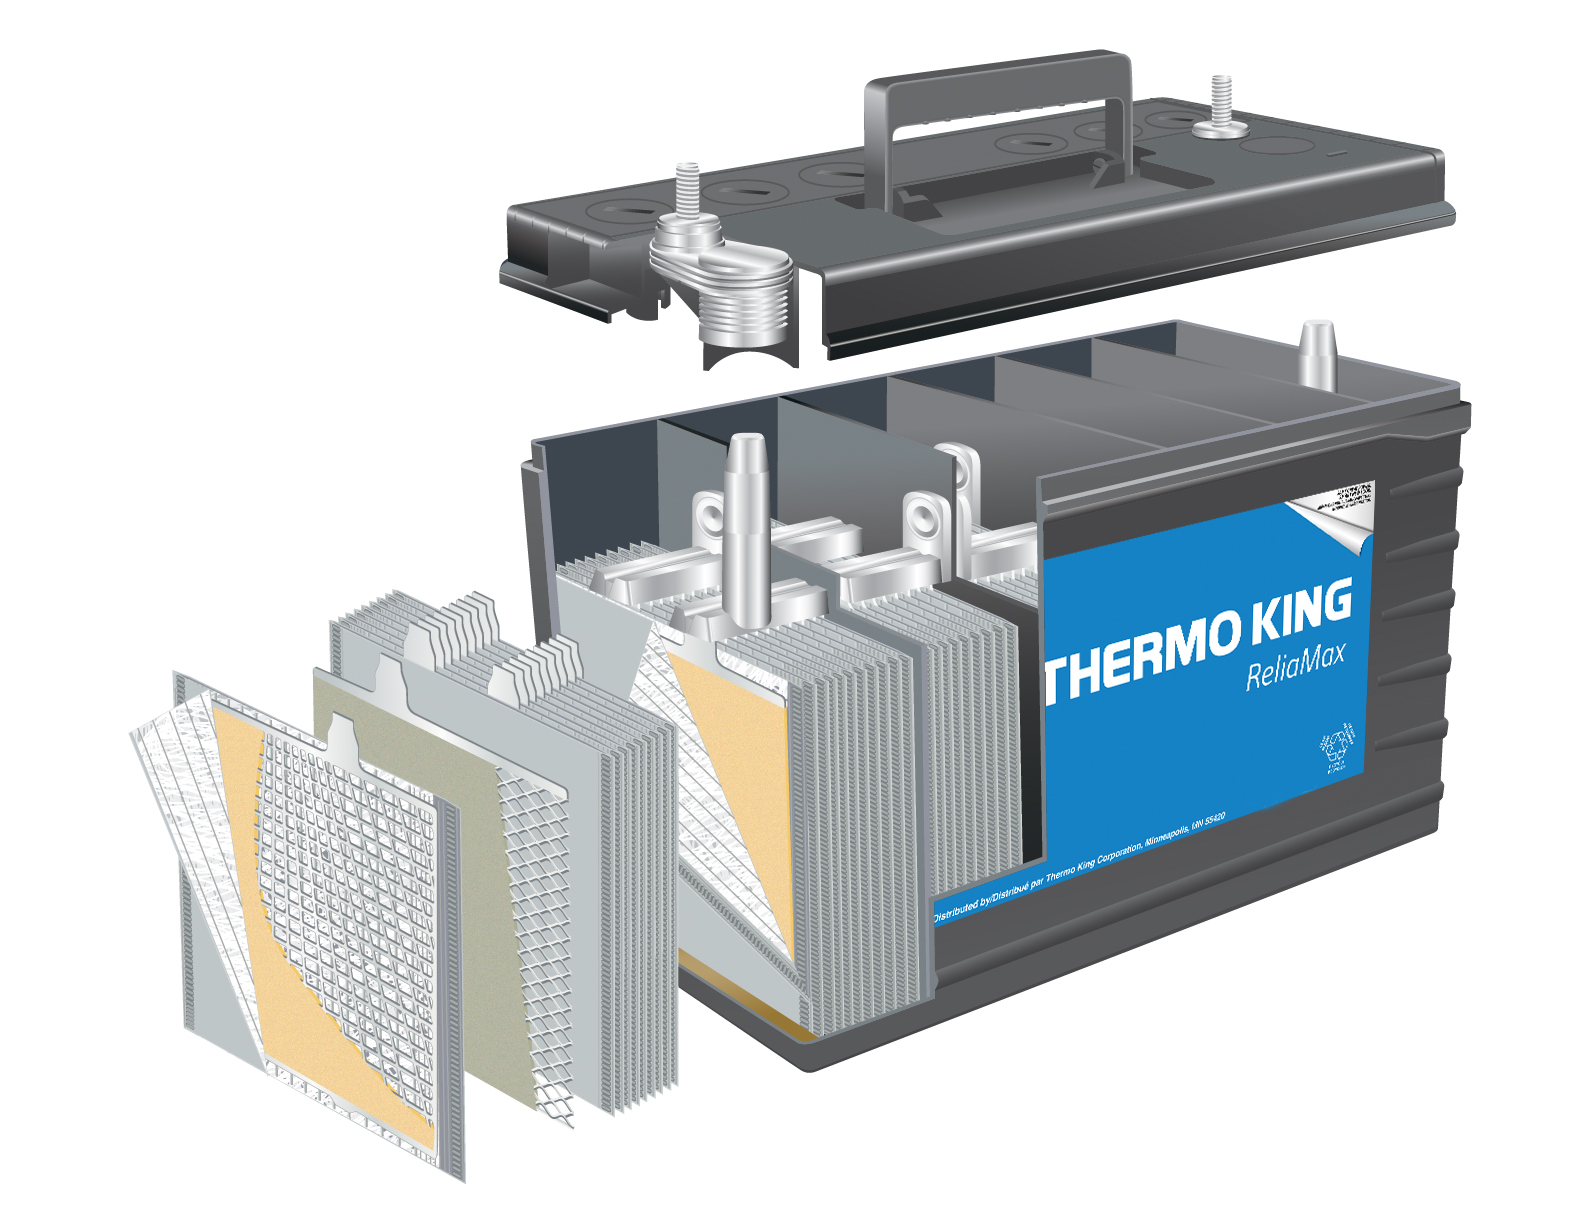 Thermo King belts are constructed from premium materials to deliver longer life and greater reliability